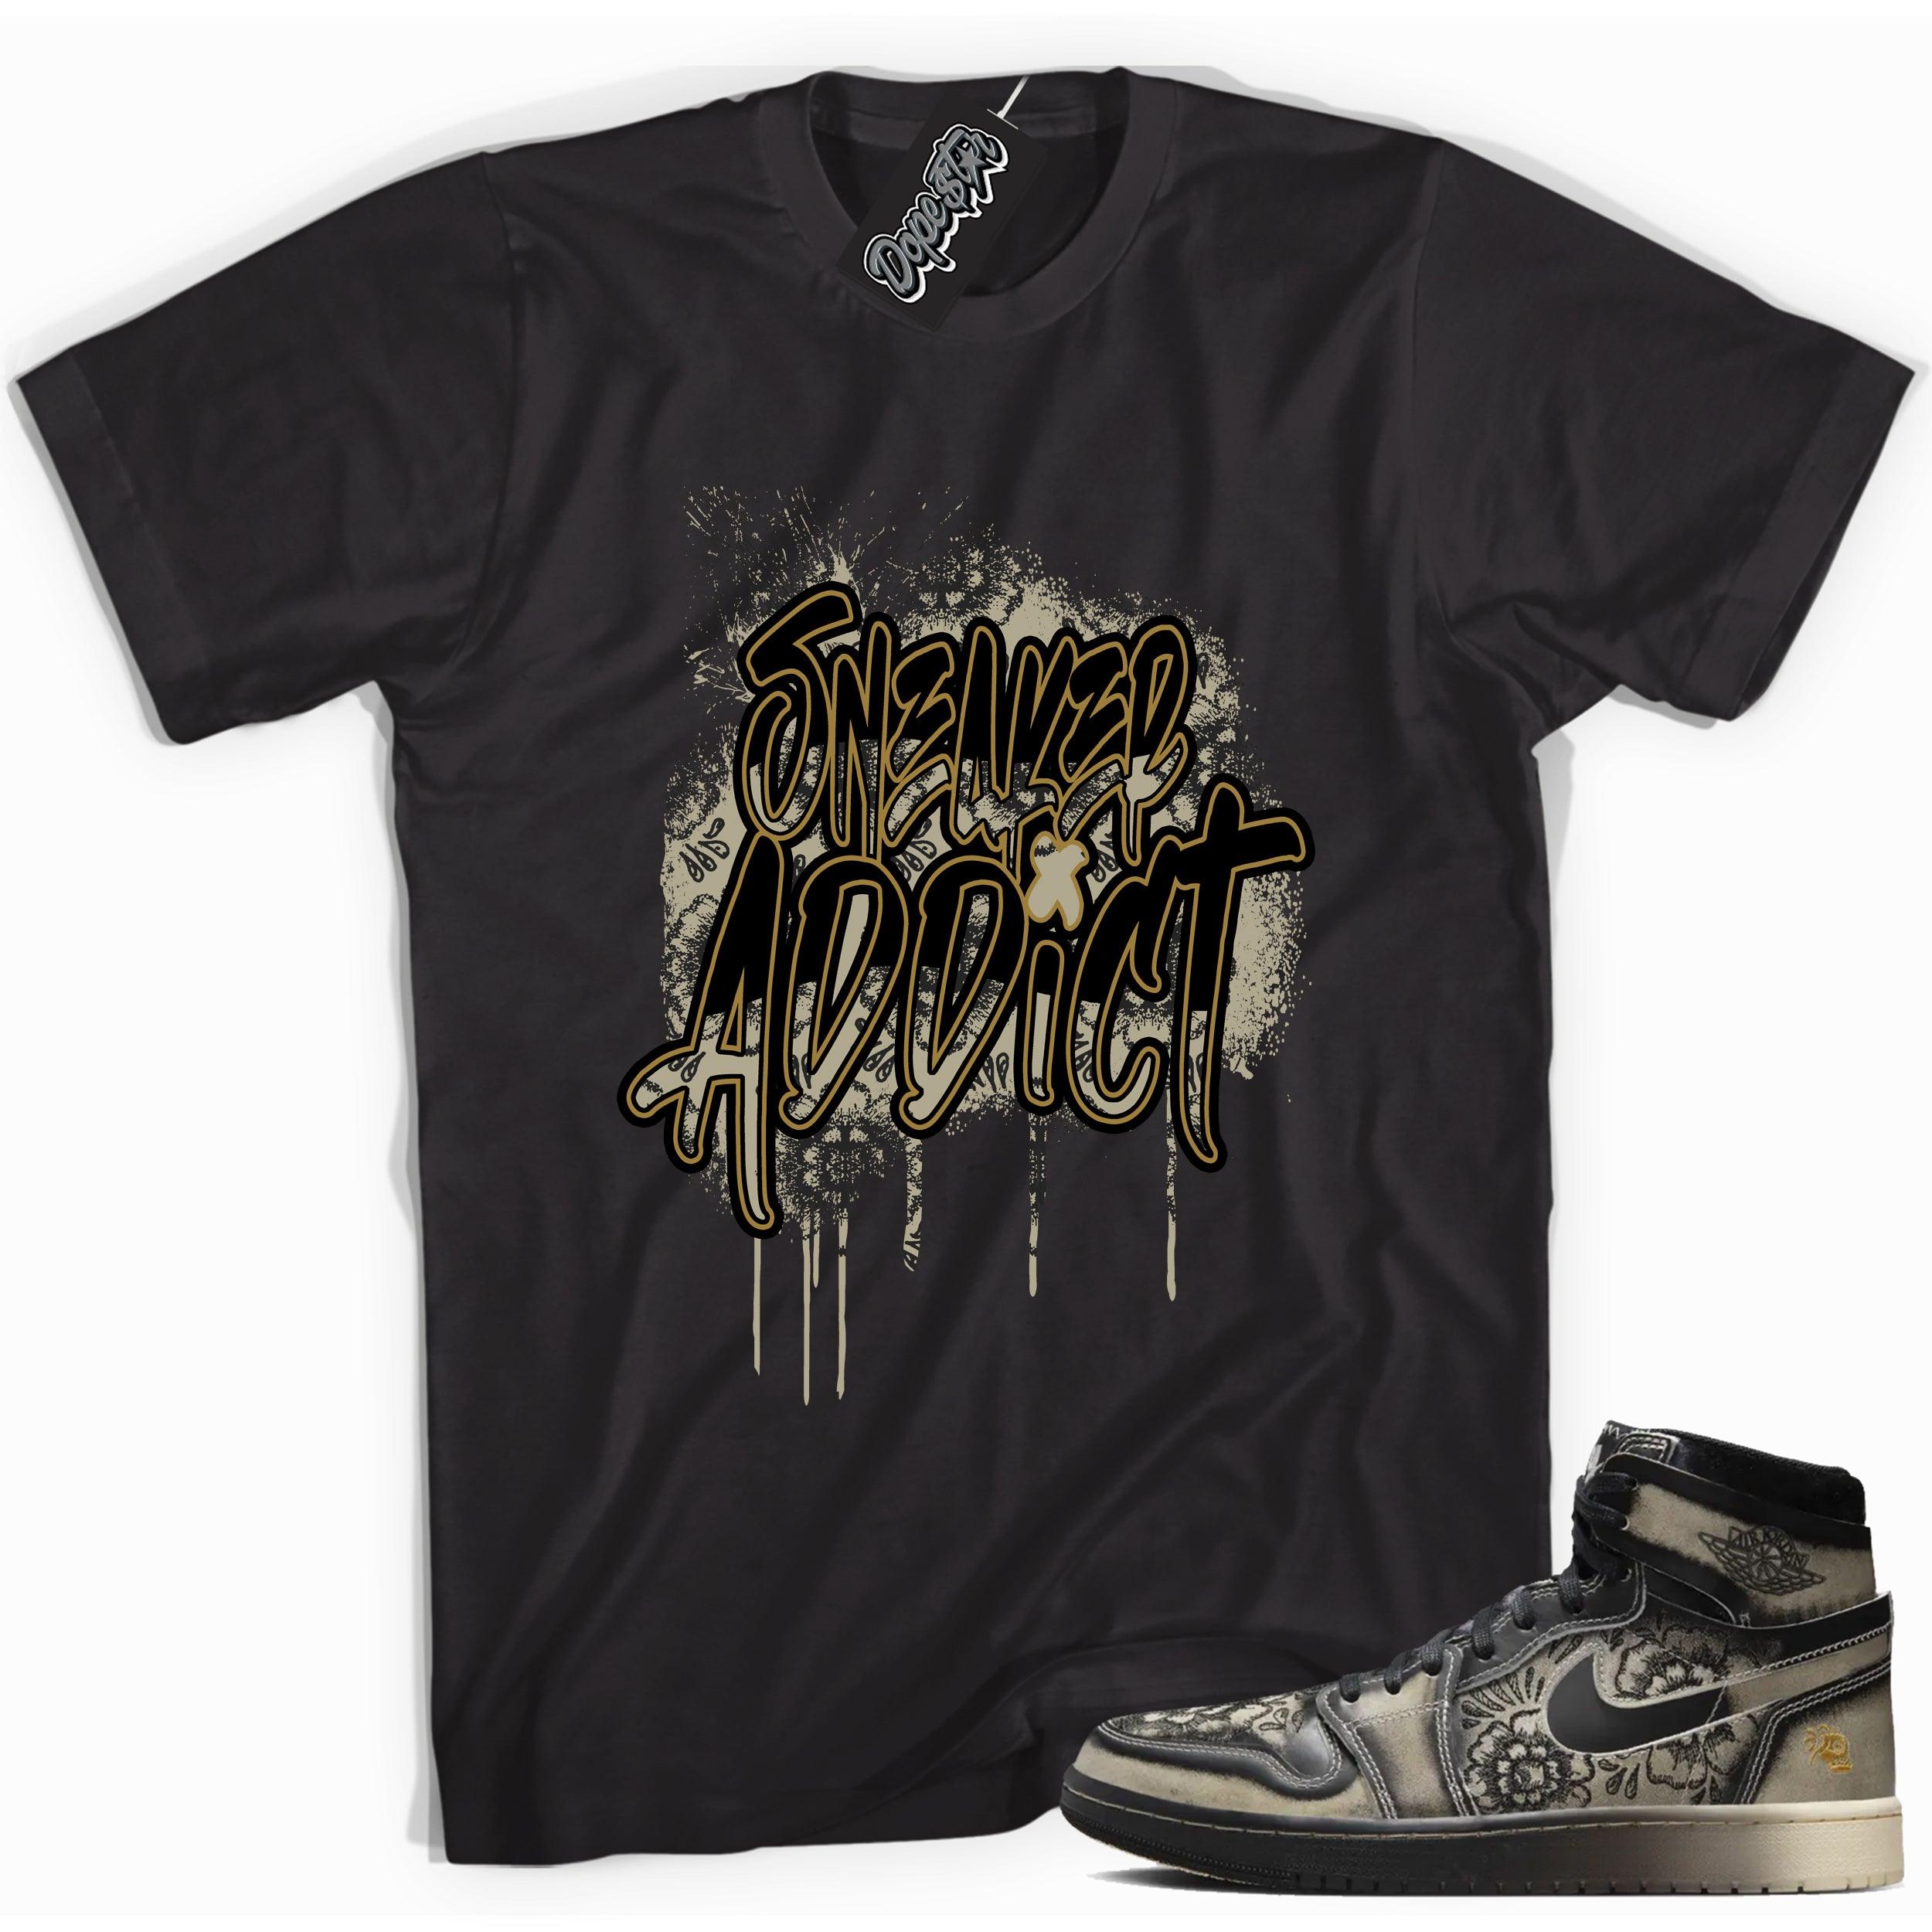 Cool Black graphic tee with “ Sneaker Addict ” print, that perfectly matches Air Jordan 1 High Zoom Comfort 2 Dia de Black and Pale Ivory sneakers 